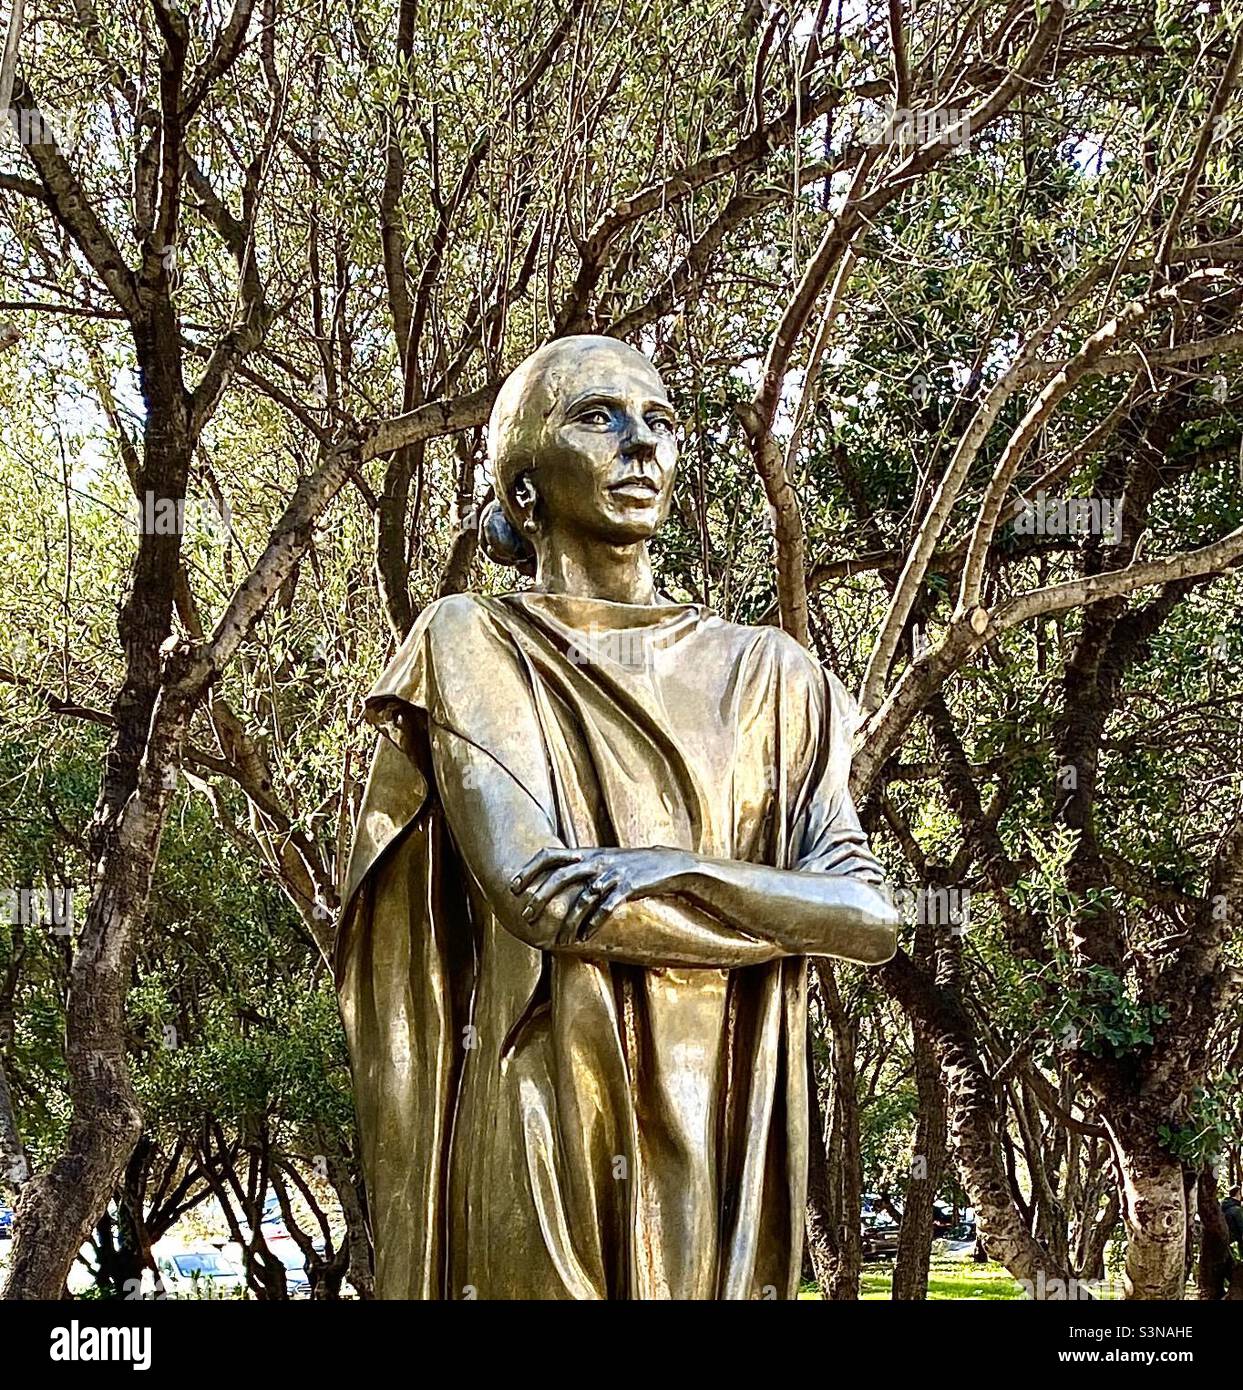 A bronze statue of Greek-American opera singer Maria Callas (1923-77), by Aphrodite Liti, near the Acropolis in Athens, Greece. Callas was arguably the world’s most famous opera singer. Stock Photo